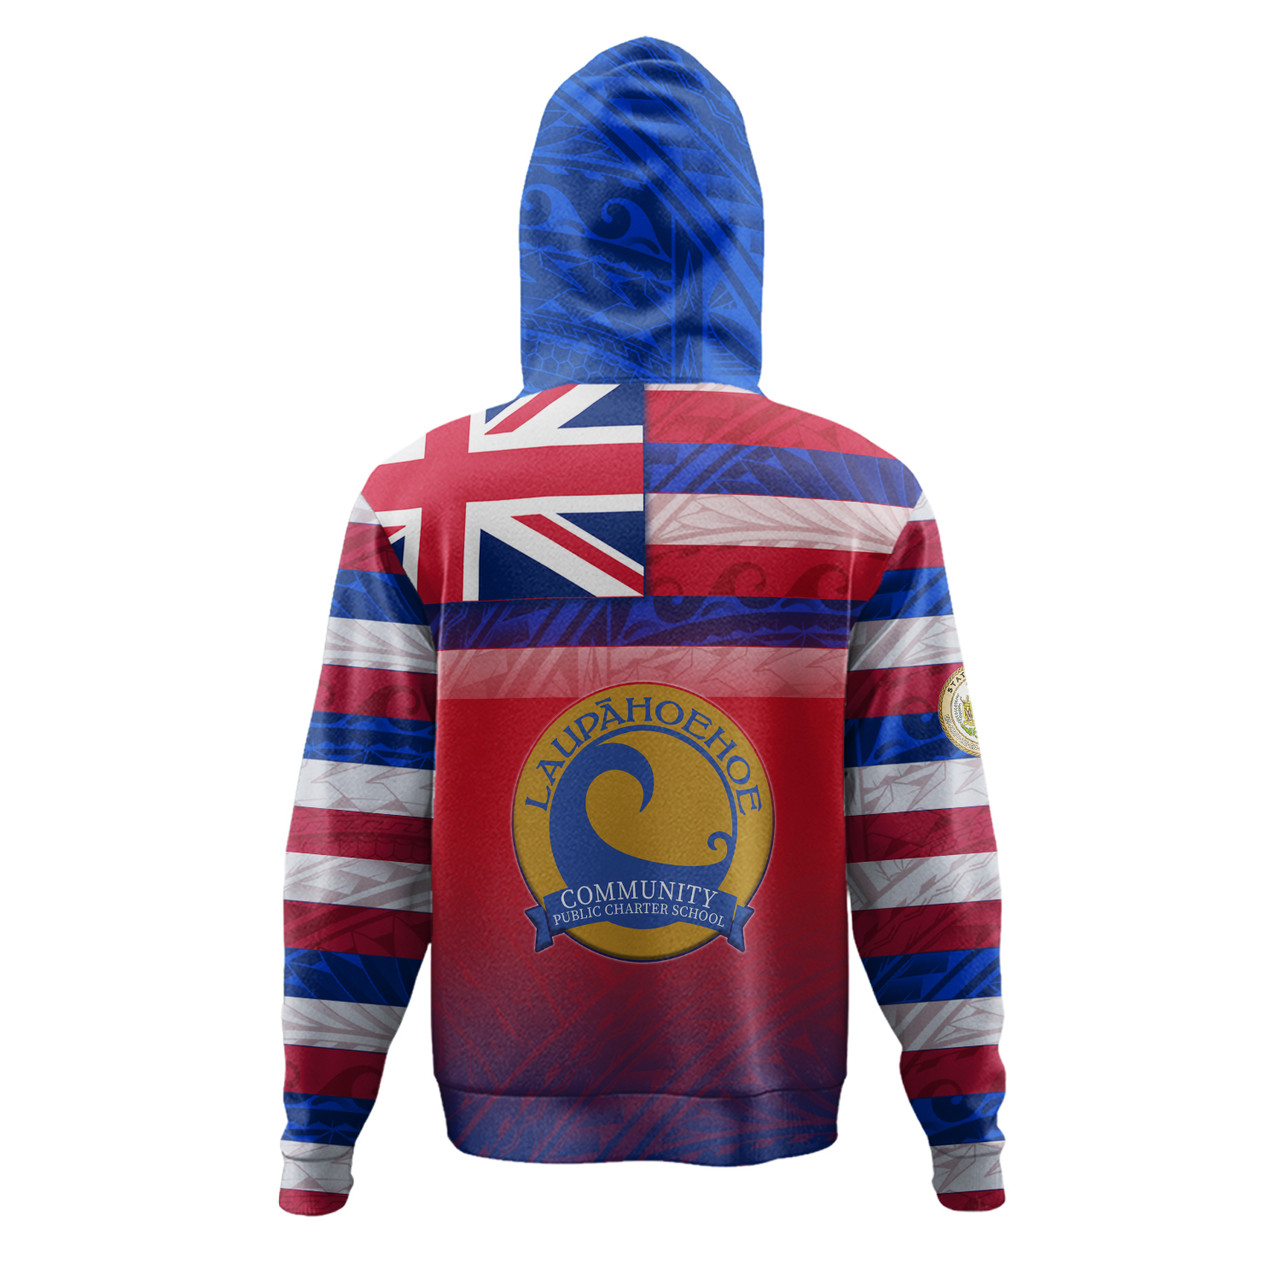 Hawaii Laupāhoehoe Community Public Charter School Hoodie Flag Color With Traditional Patterns